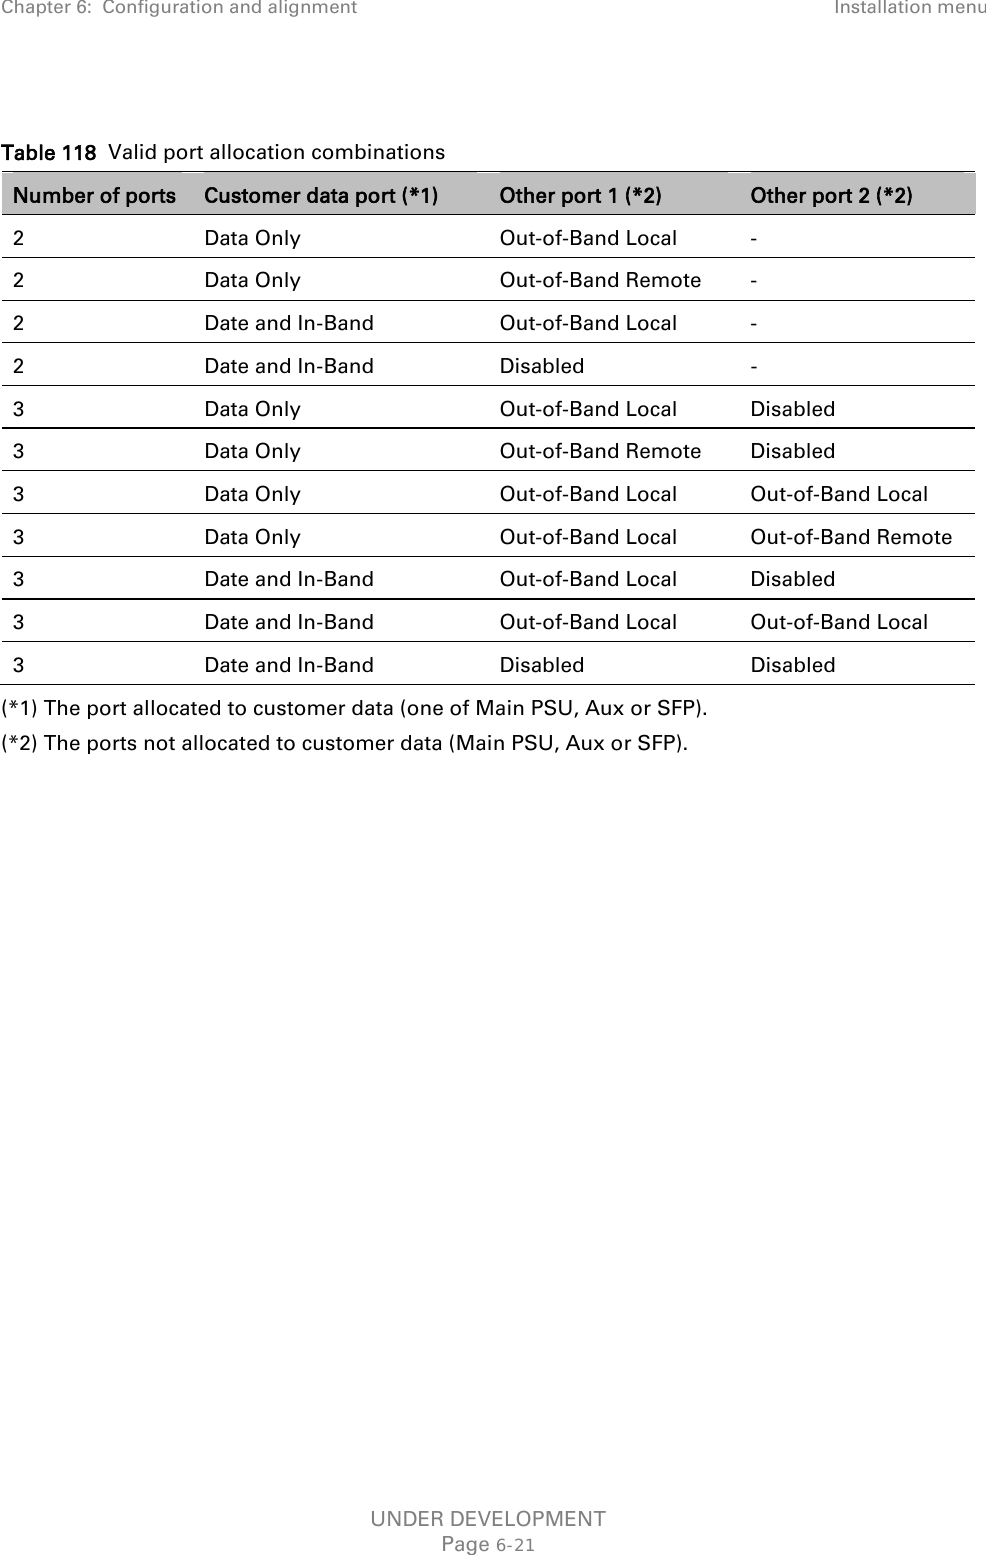 Chapter 6:  Configuration and alignment Installation menu   Table 118  Valid port allocation combinations Number of ports Customer data port (*1) Other port 1 (*2) Other port 2 (*2) 2  Data Only Out-of-Band Local  - 2  Data Only Out-of-Band Remote  - 2  Date and In-Band Out-of-Band Local  - 2  Date and In-Band Disabled  - 3  Data Only Out-of-Band Local Disabled 3  Data Only Out-of-Band Remote Disabled 3  Data Only Out-of-Band Local Out-of-Band Local 3  Data Only Out-of-Band Local Out-of-Band Remote 3  Date and In-Band Out-of-Band Local Disabled 3  Date and In-Band Out-of-Band Local Out-of-Band Local 3  Date and In-Band Disabled Disabled (*1) The port allocated to customer data (one of Main PSU, Aux or SFP). (*2) The ports not allocated to customer data (Main PSU, Aux or SFP).    UNDER DEVELOPMENT Page 6-21 